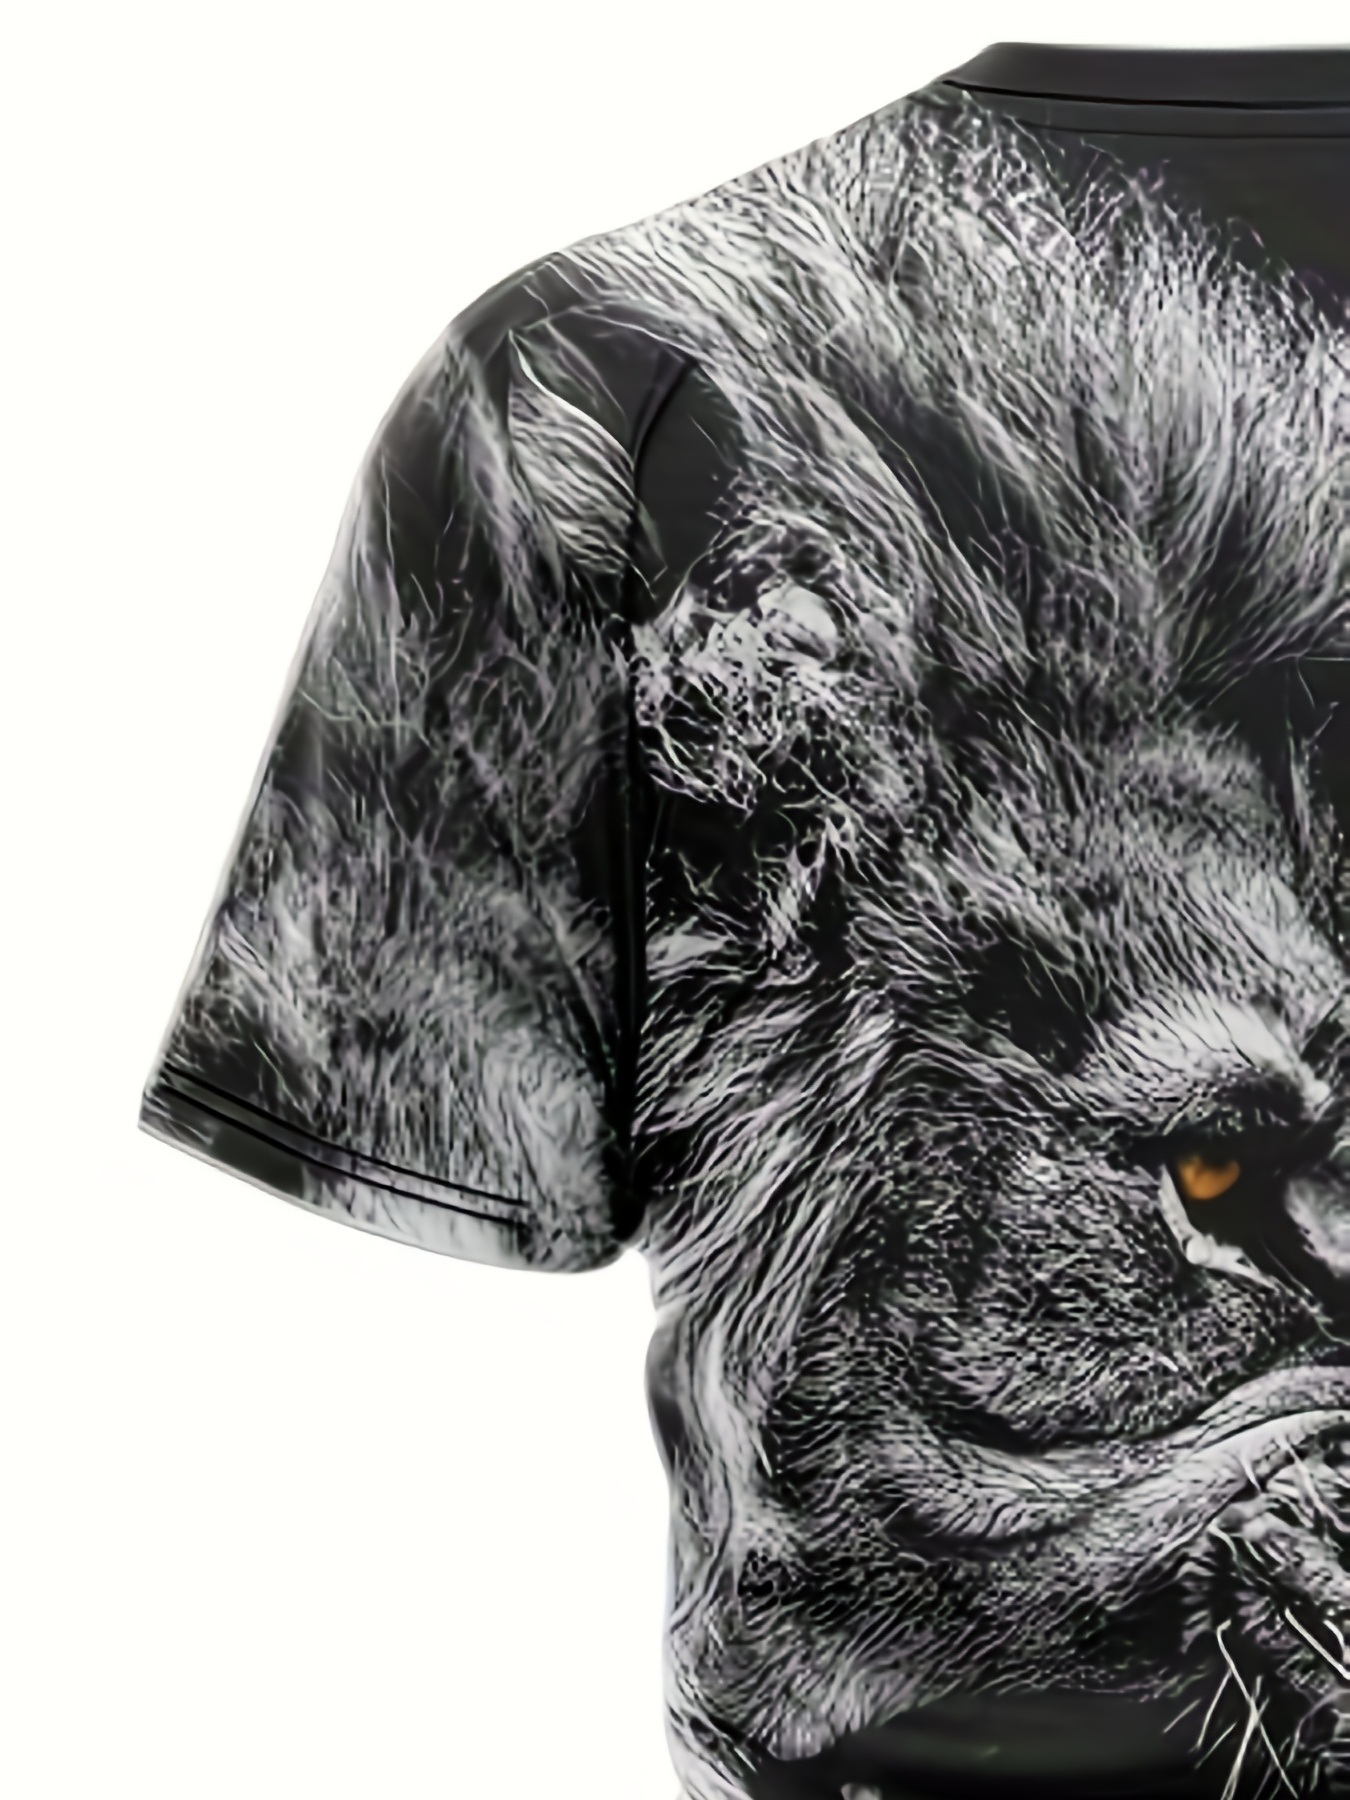 The Lion King Summer 3D Printed men's sets T-shirts Shorts fashion  Sportswear Tracksuit O Neck Short Sleeve Mens Clothes Suit